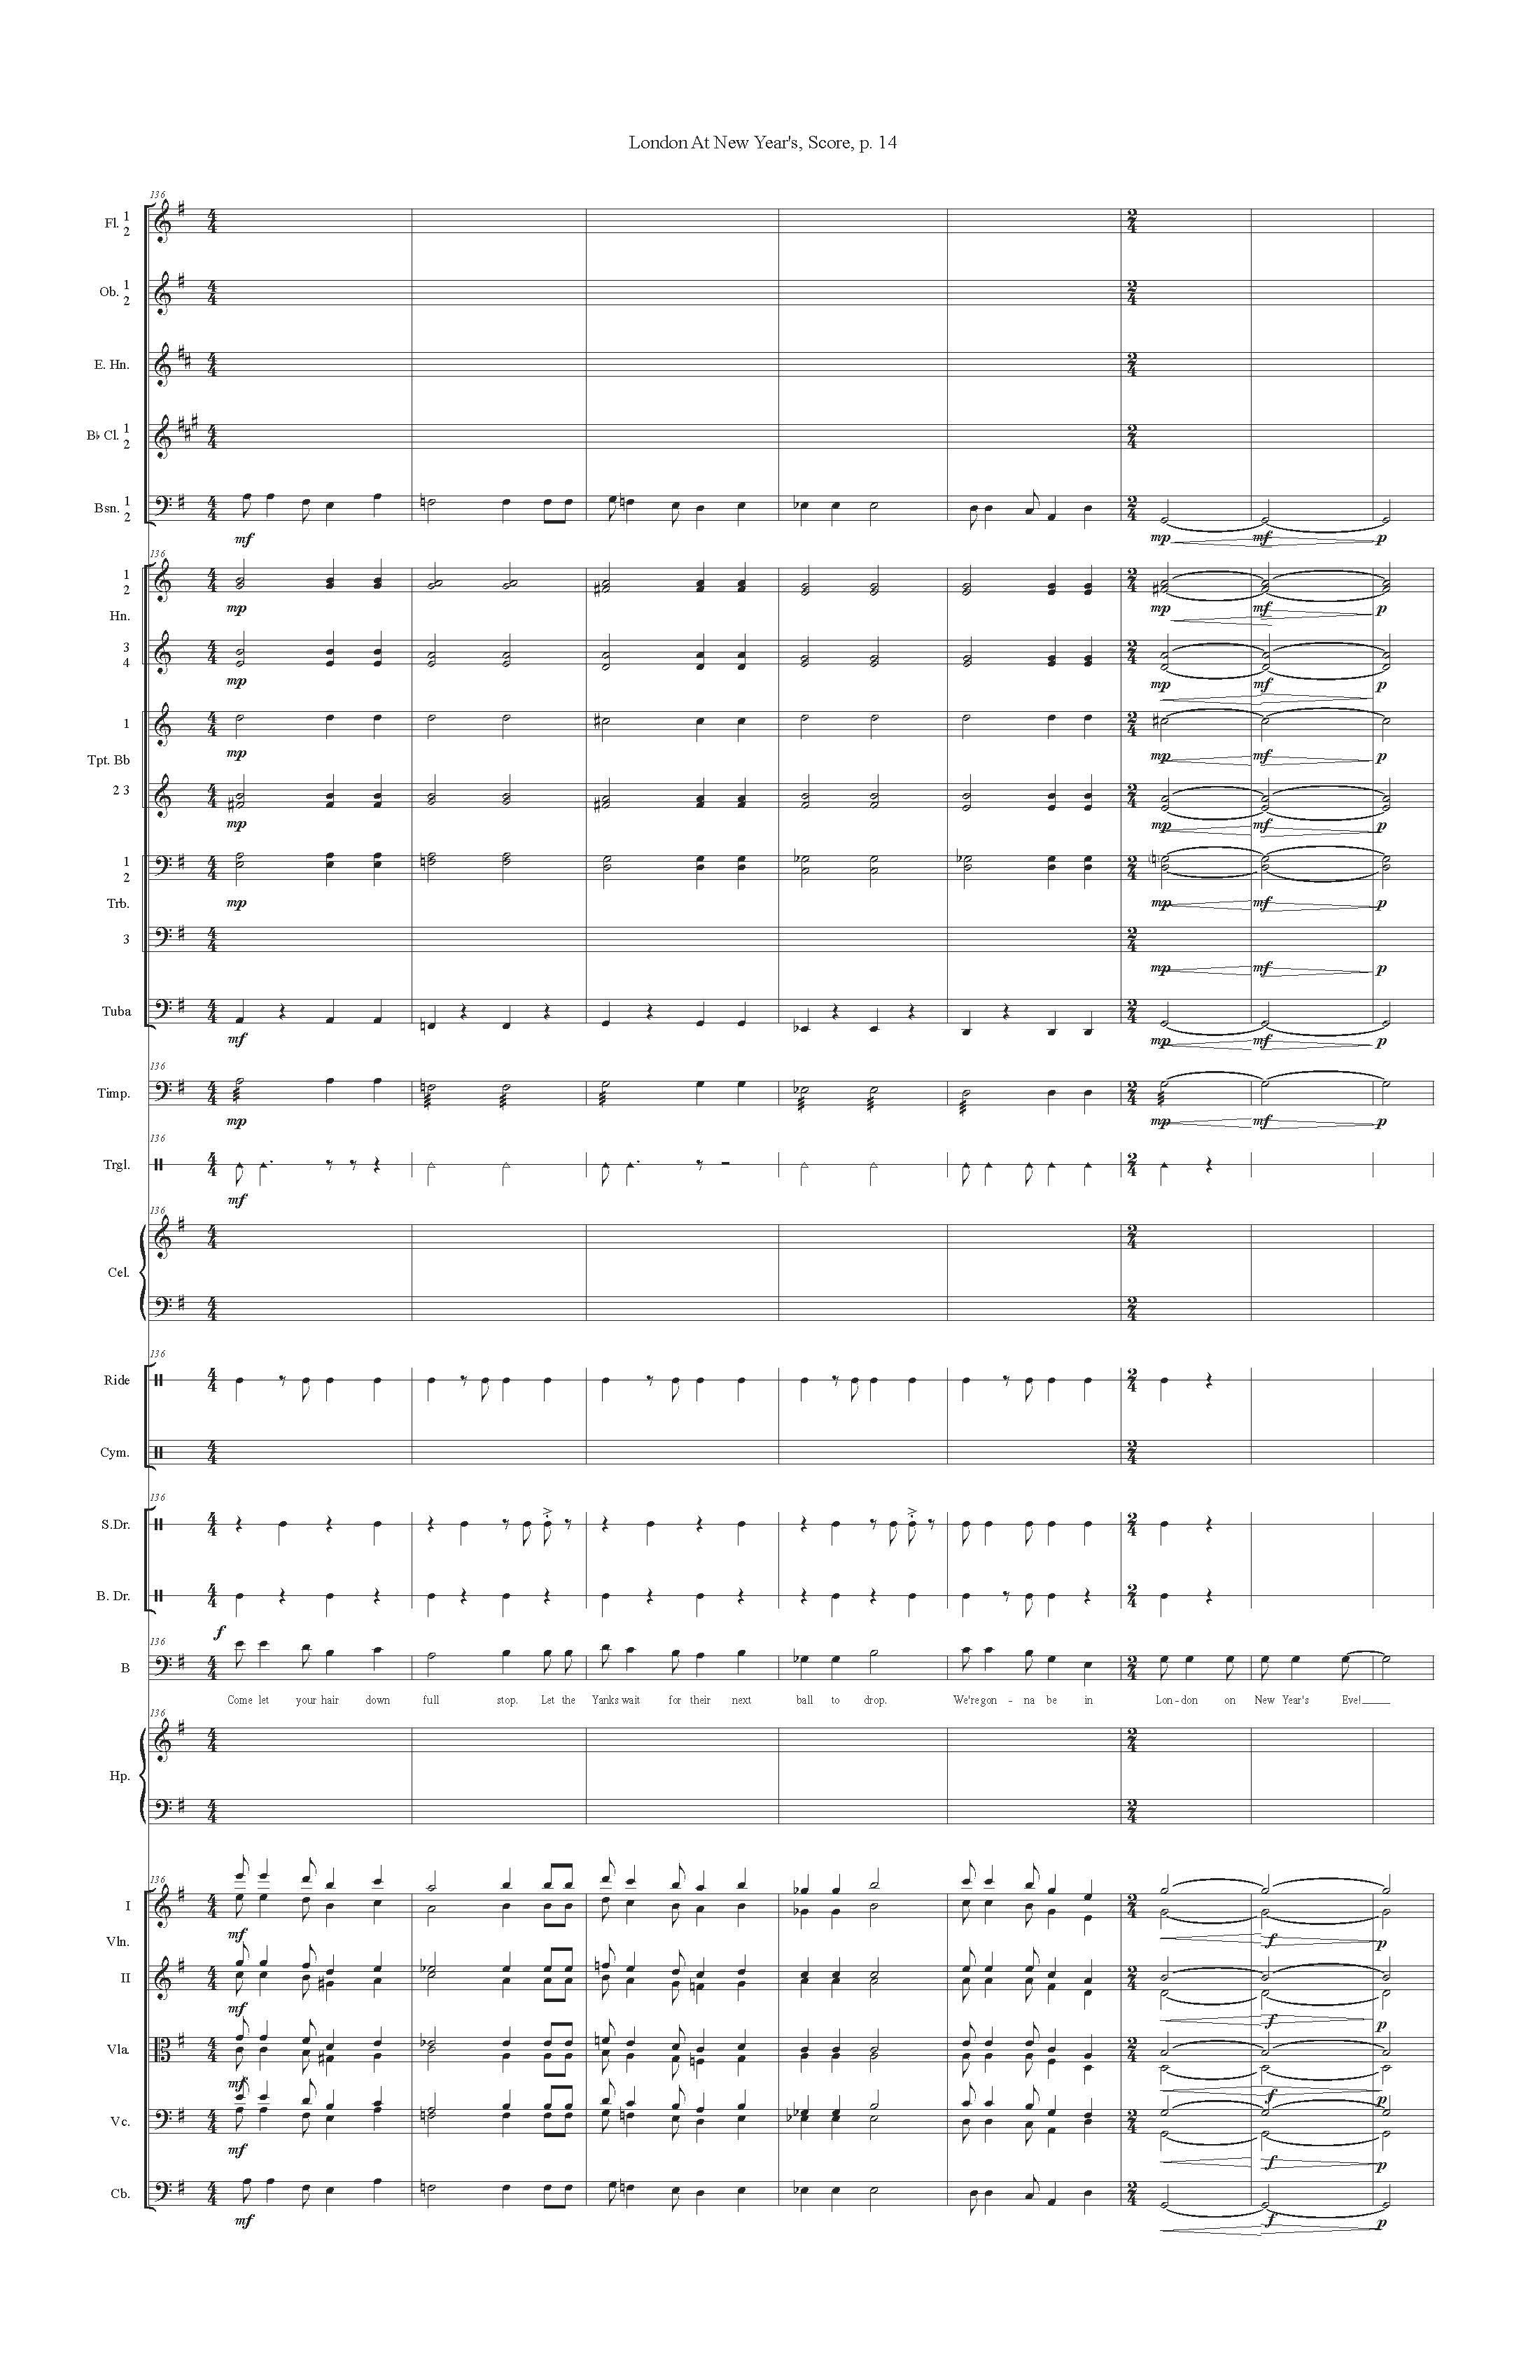 LONDON AT NEW YEARS ORCH - Score_Page_14.jpg